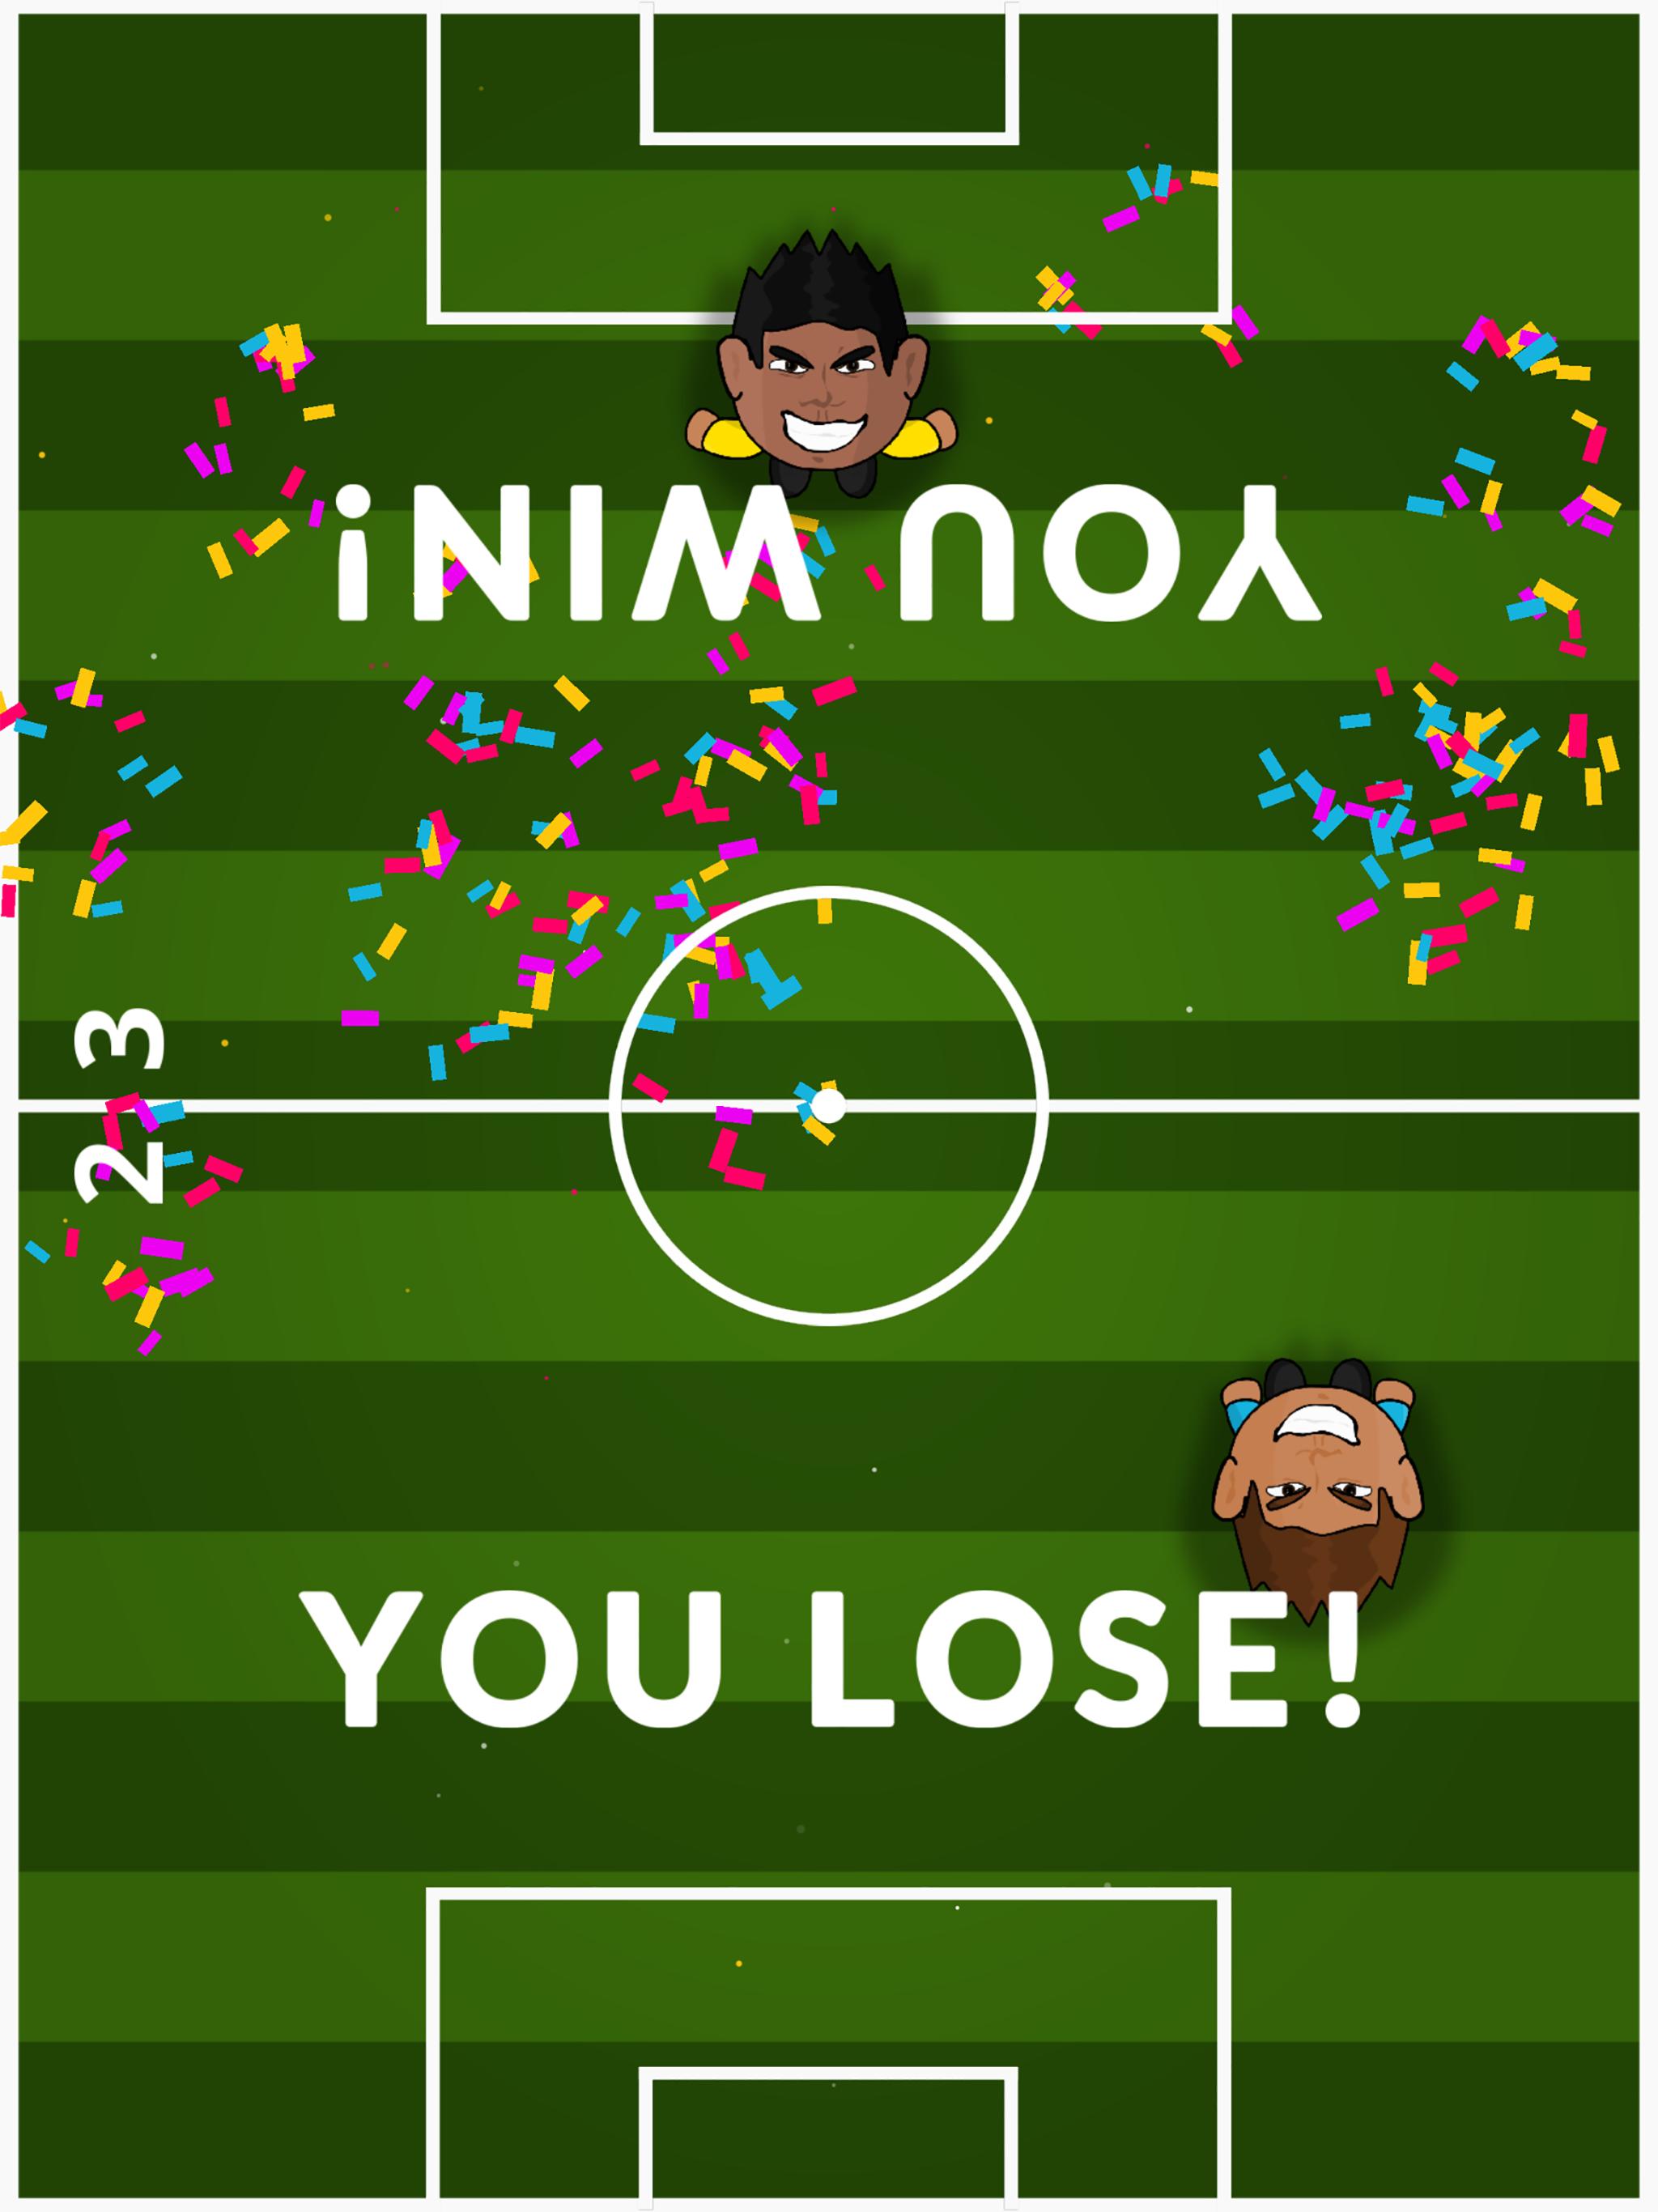 Soccer 1v1 Two Player Games For Android Apk Download - 1v1 roblox games